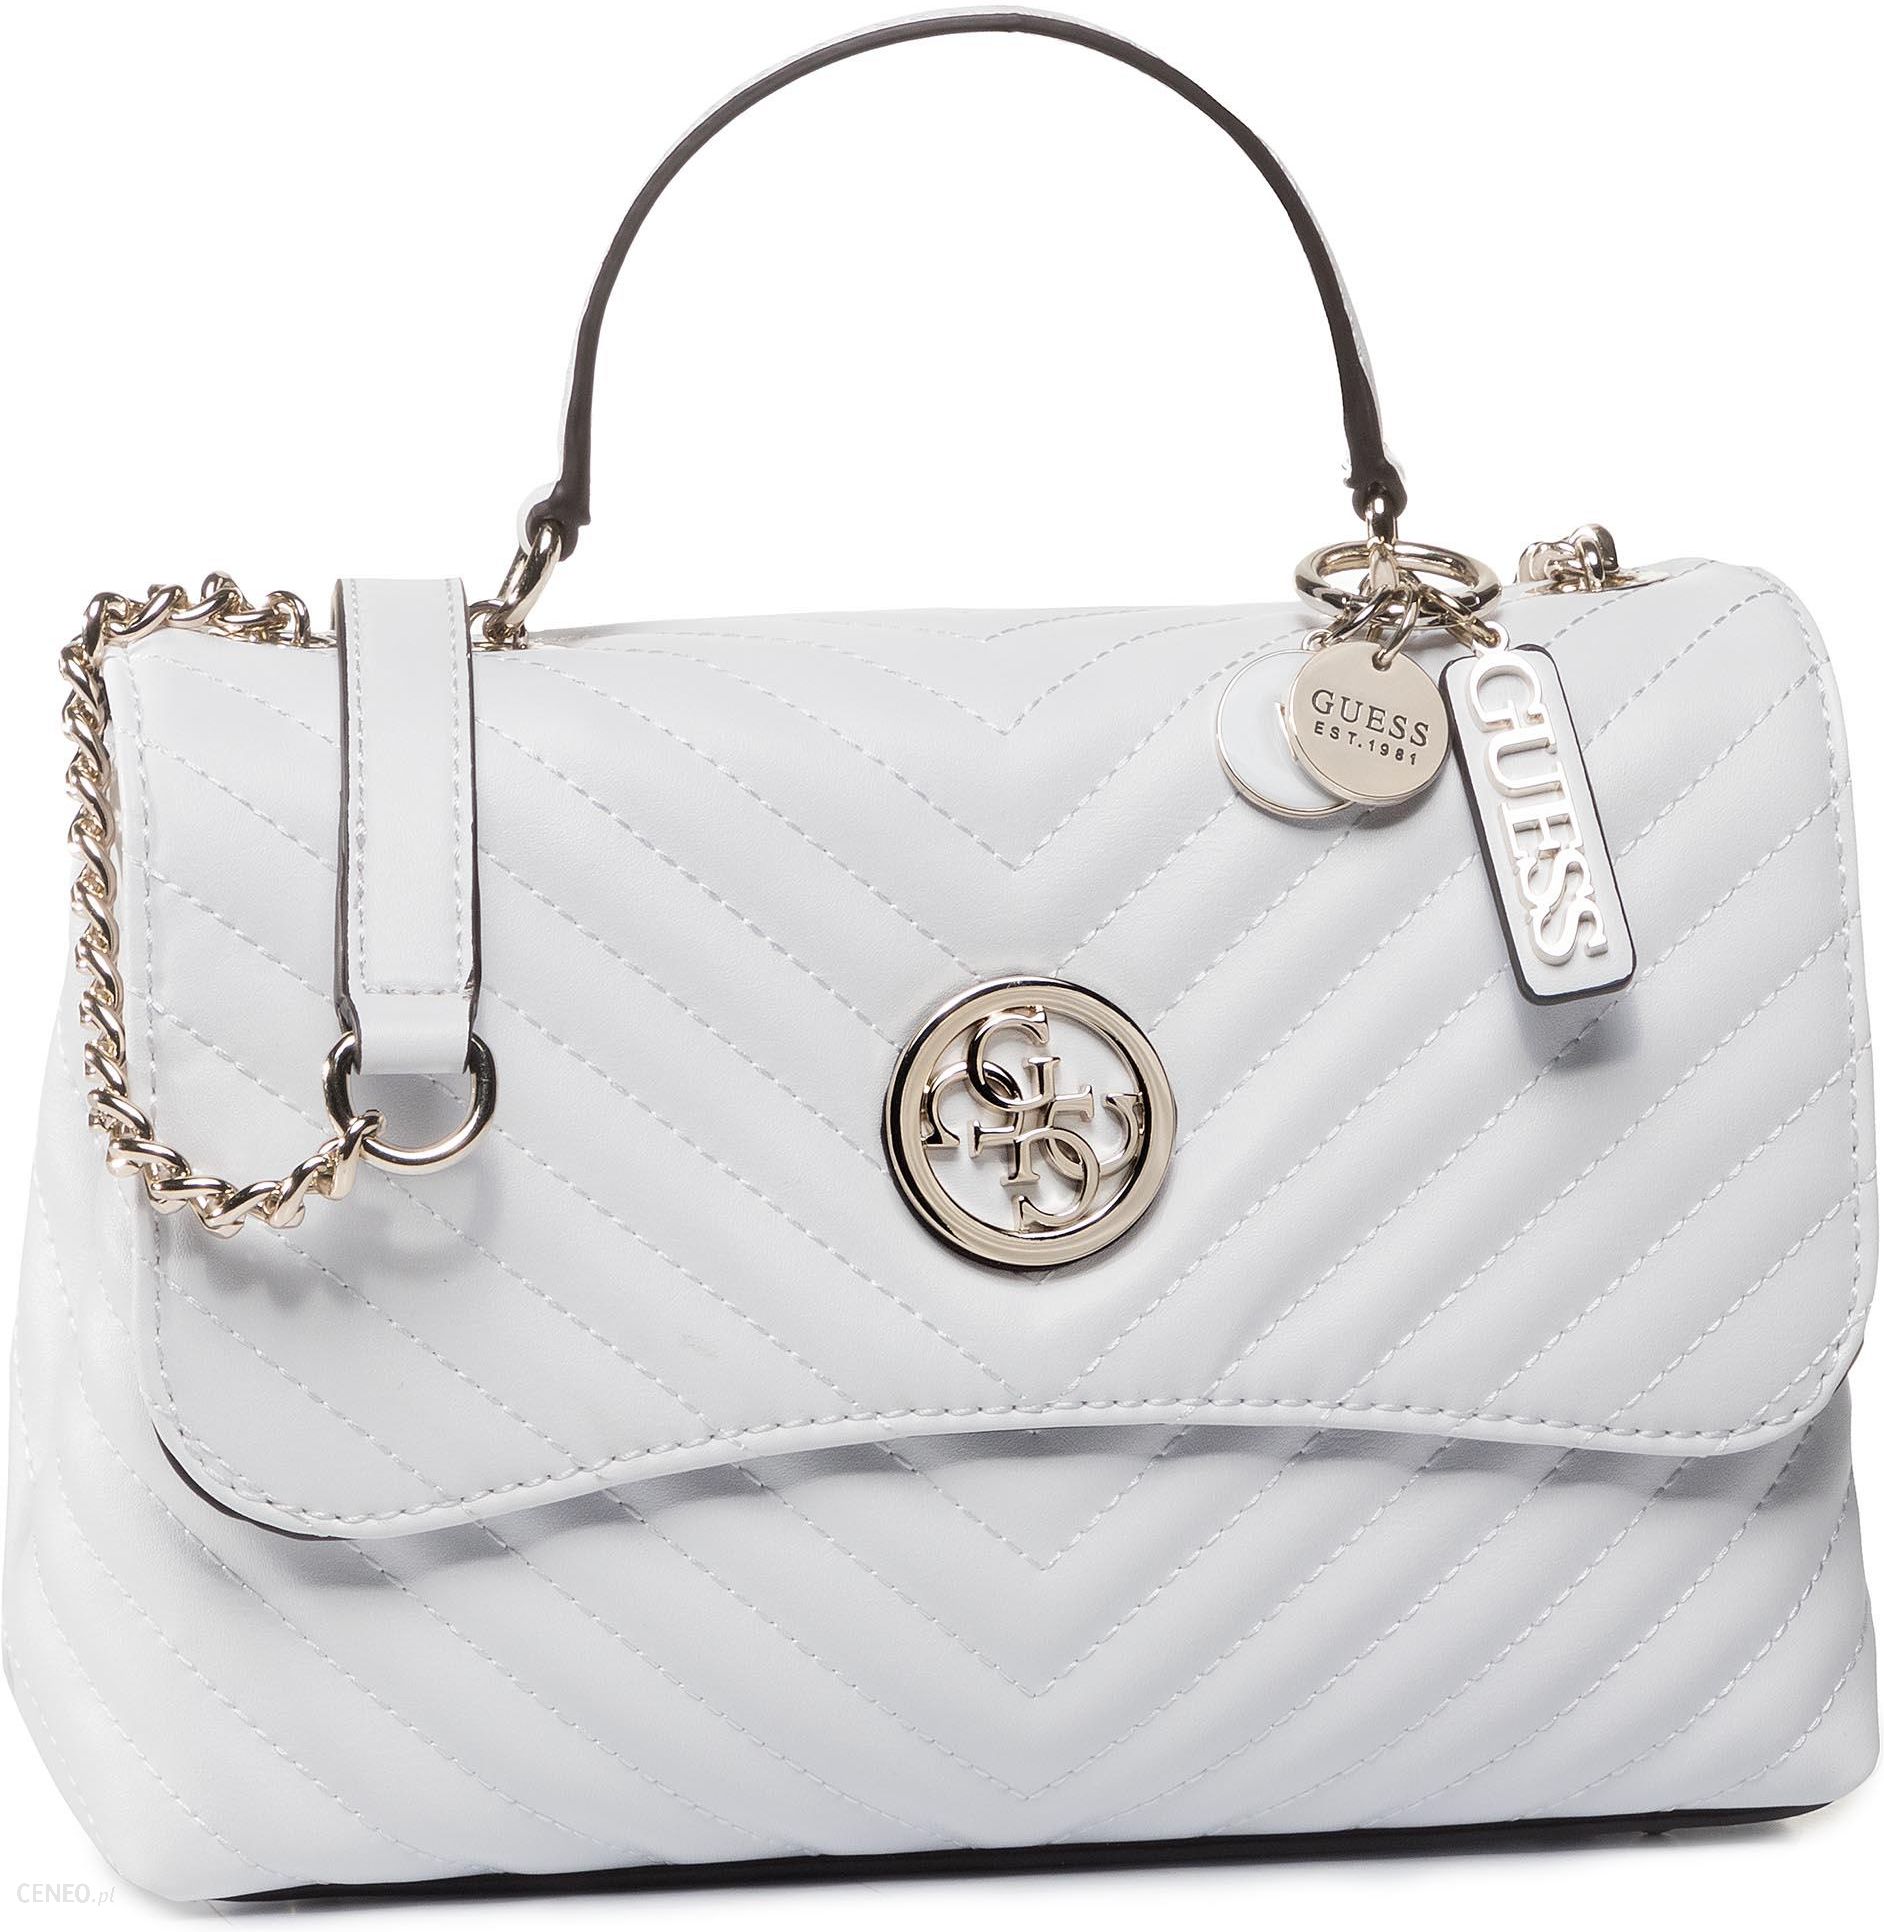 Guess Blakely сумка White. Guess Shoulder Bag. Guess vg504921. Сумка guess 1981 белая.